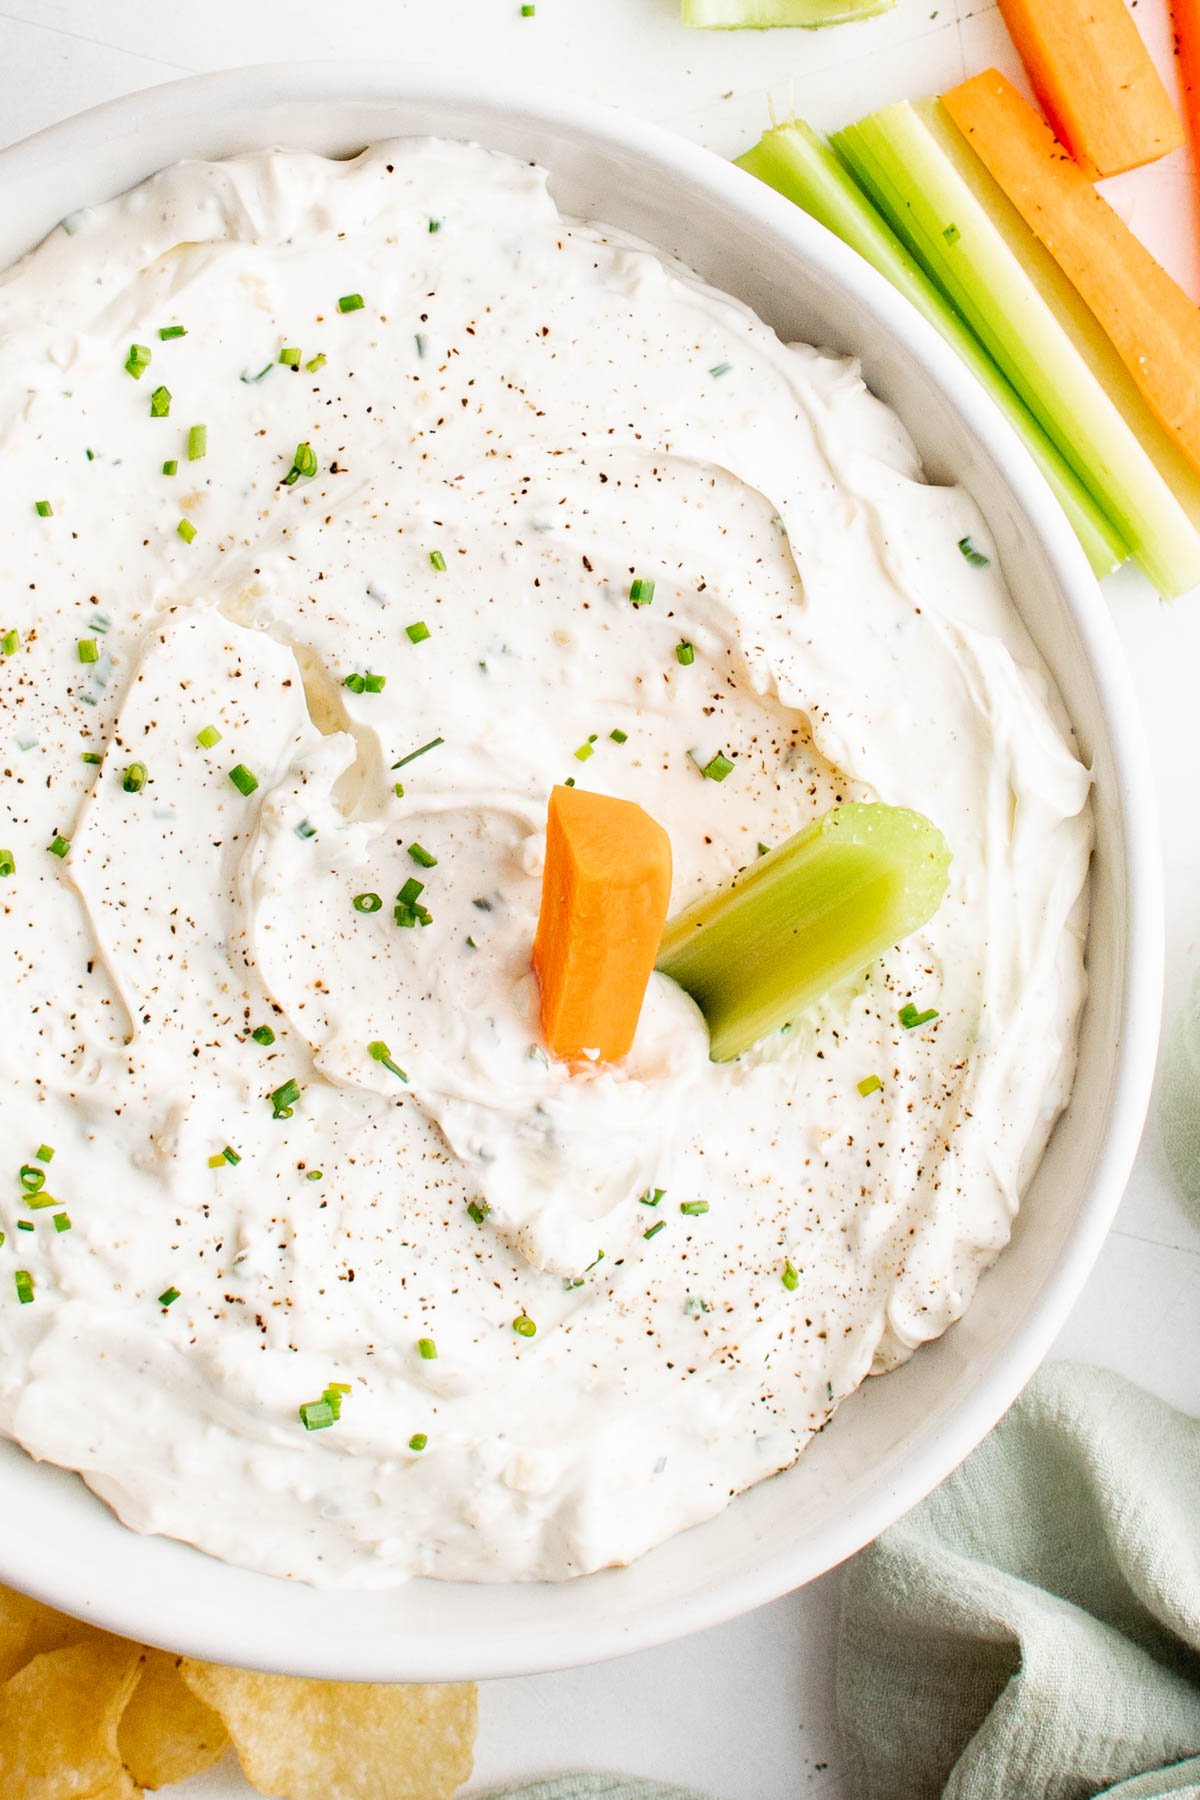 bowl of garlic dip with a carrot and celery stick.